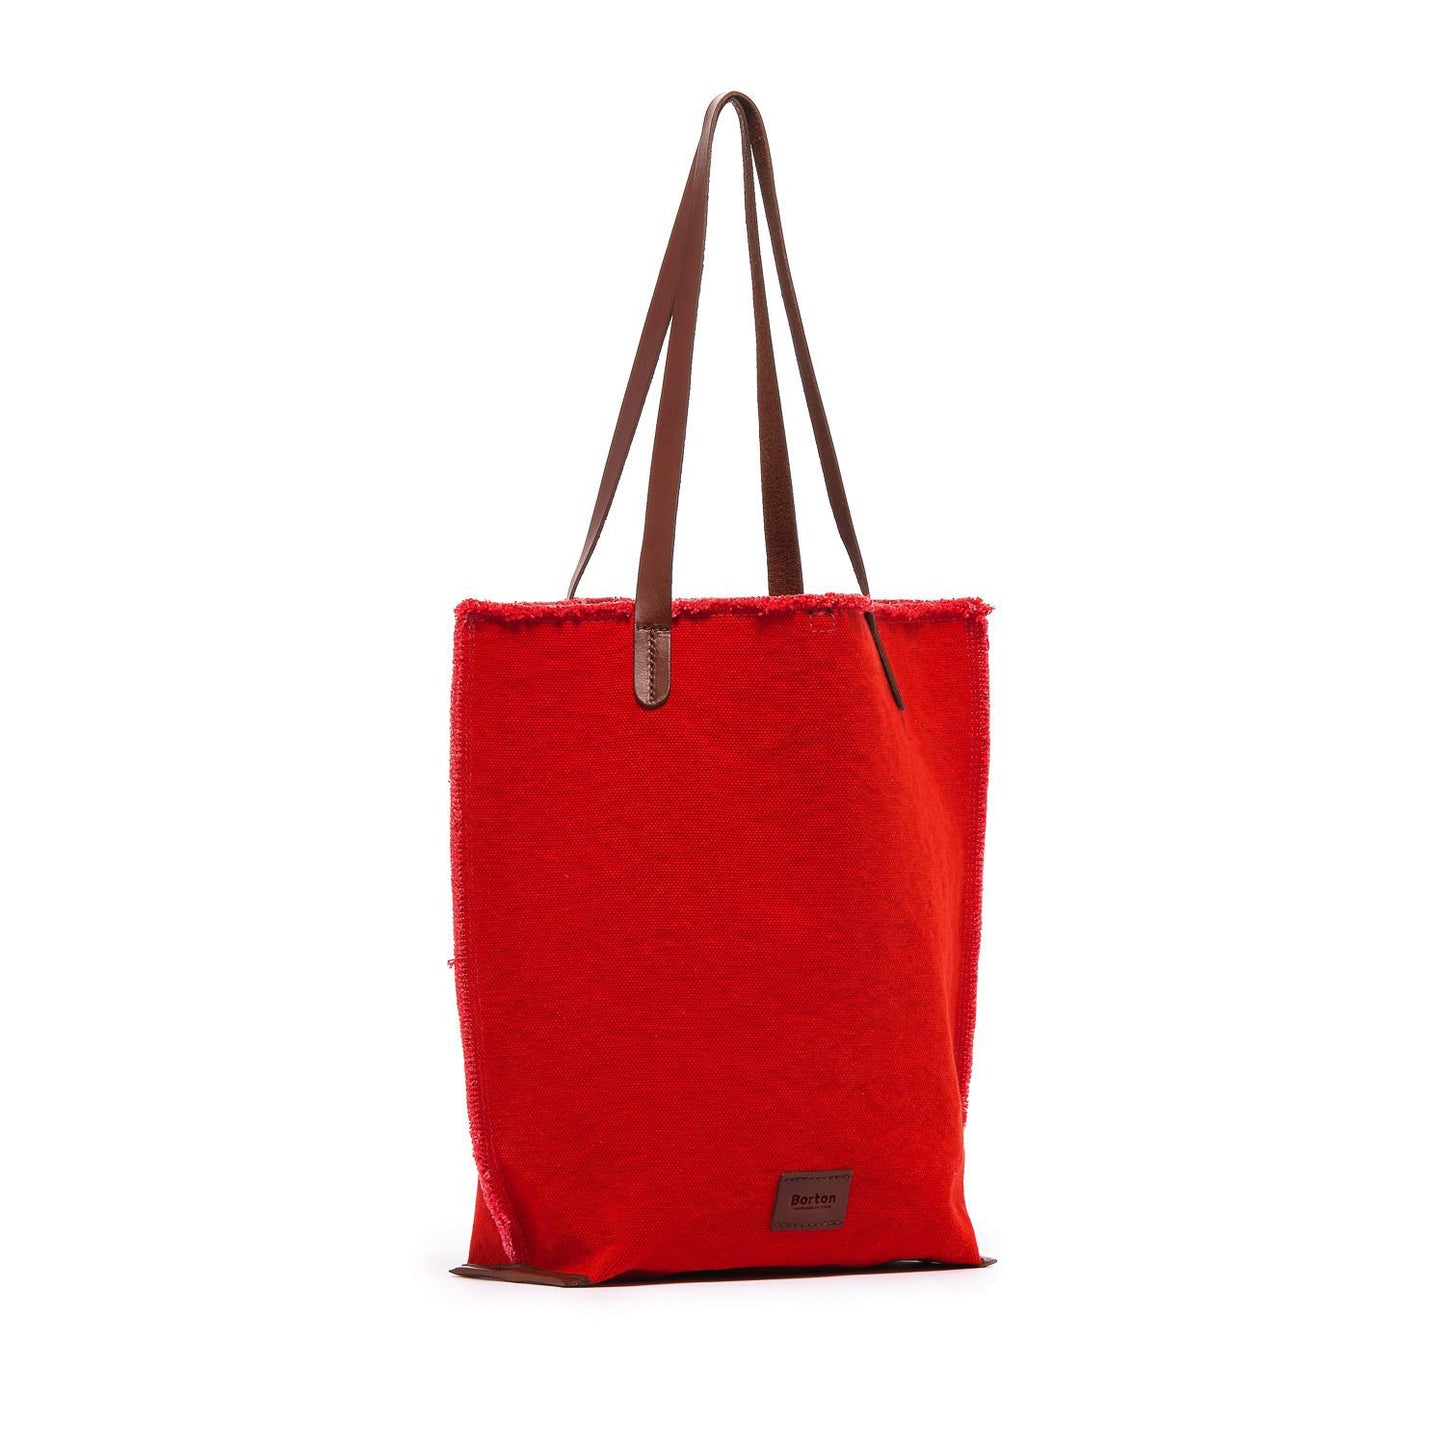 Mery Tote Bag Red Canvas & Tan Leather